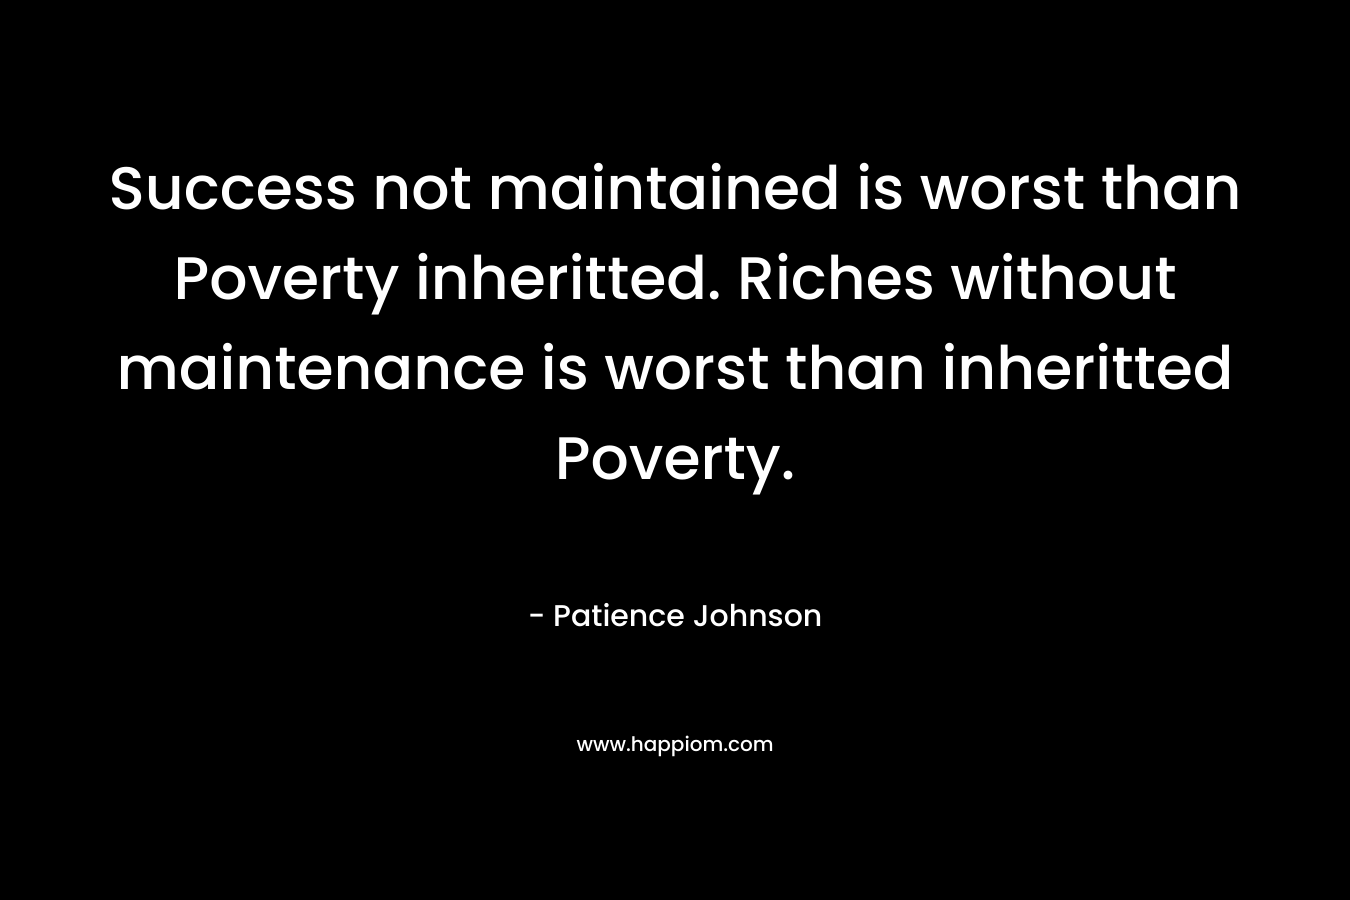 Success not maintained is worst than Poverty inheritted. Riches without maintenance is worst than inheritted Poverty.